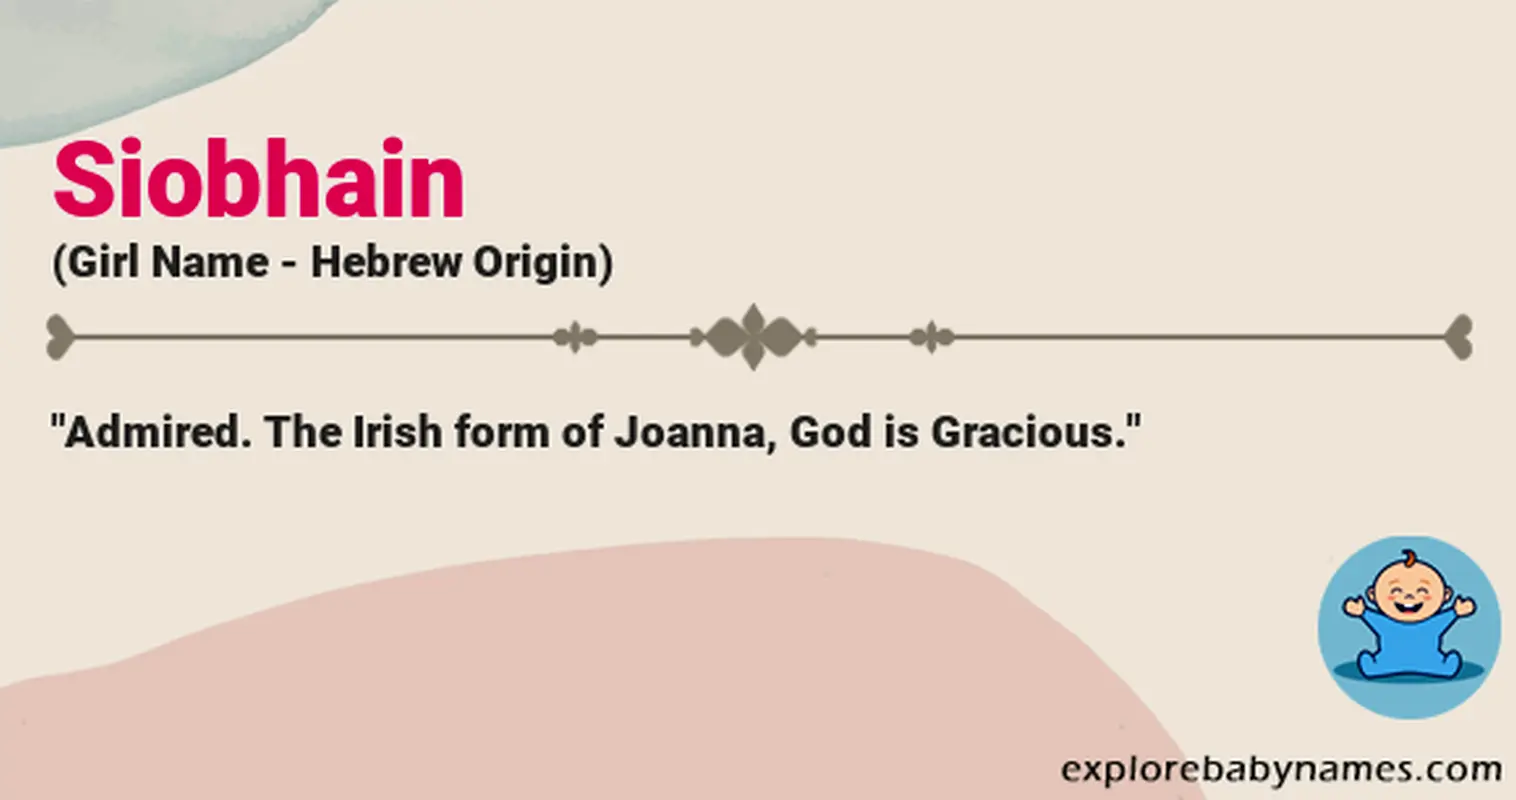 Meaning of Siobhain